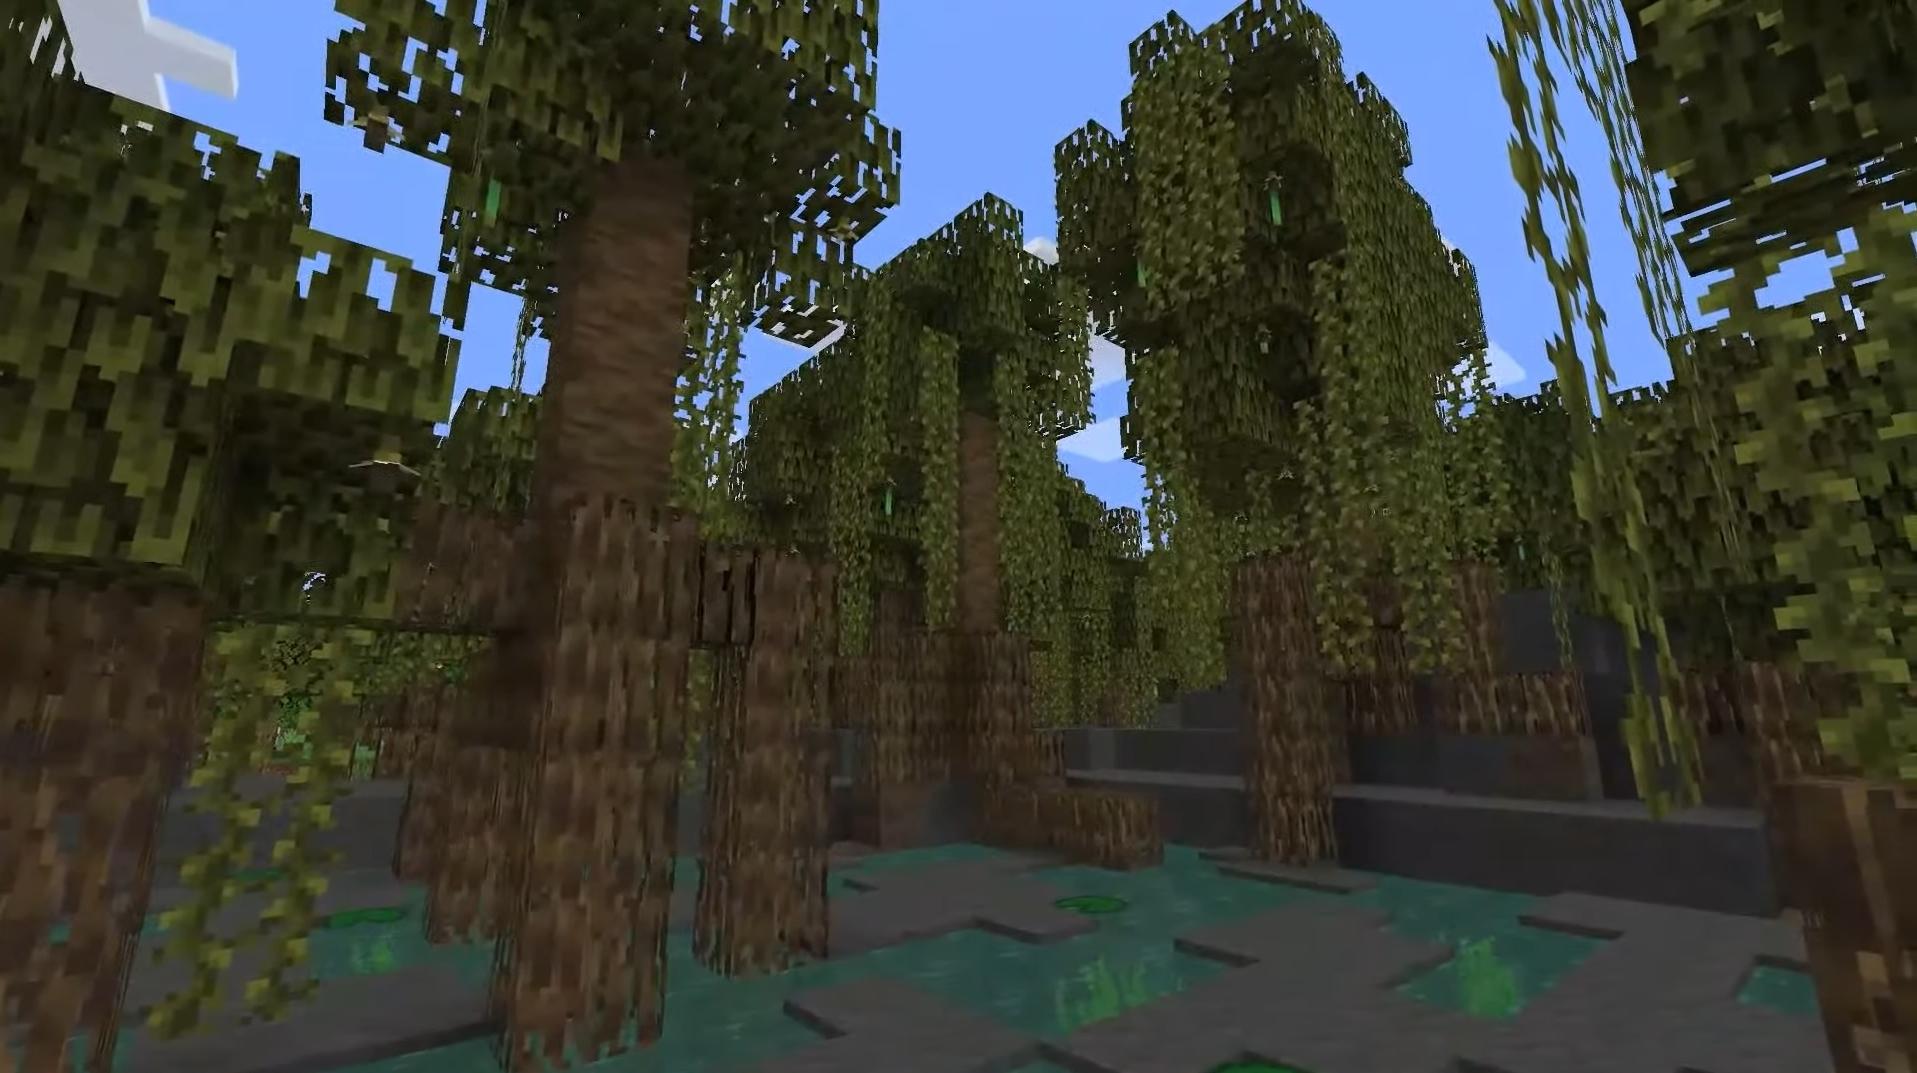 Minecraft mangroves: how to find and cultivate these strange new trees News 24